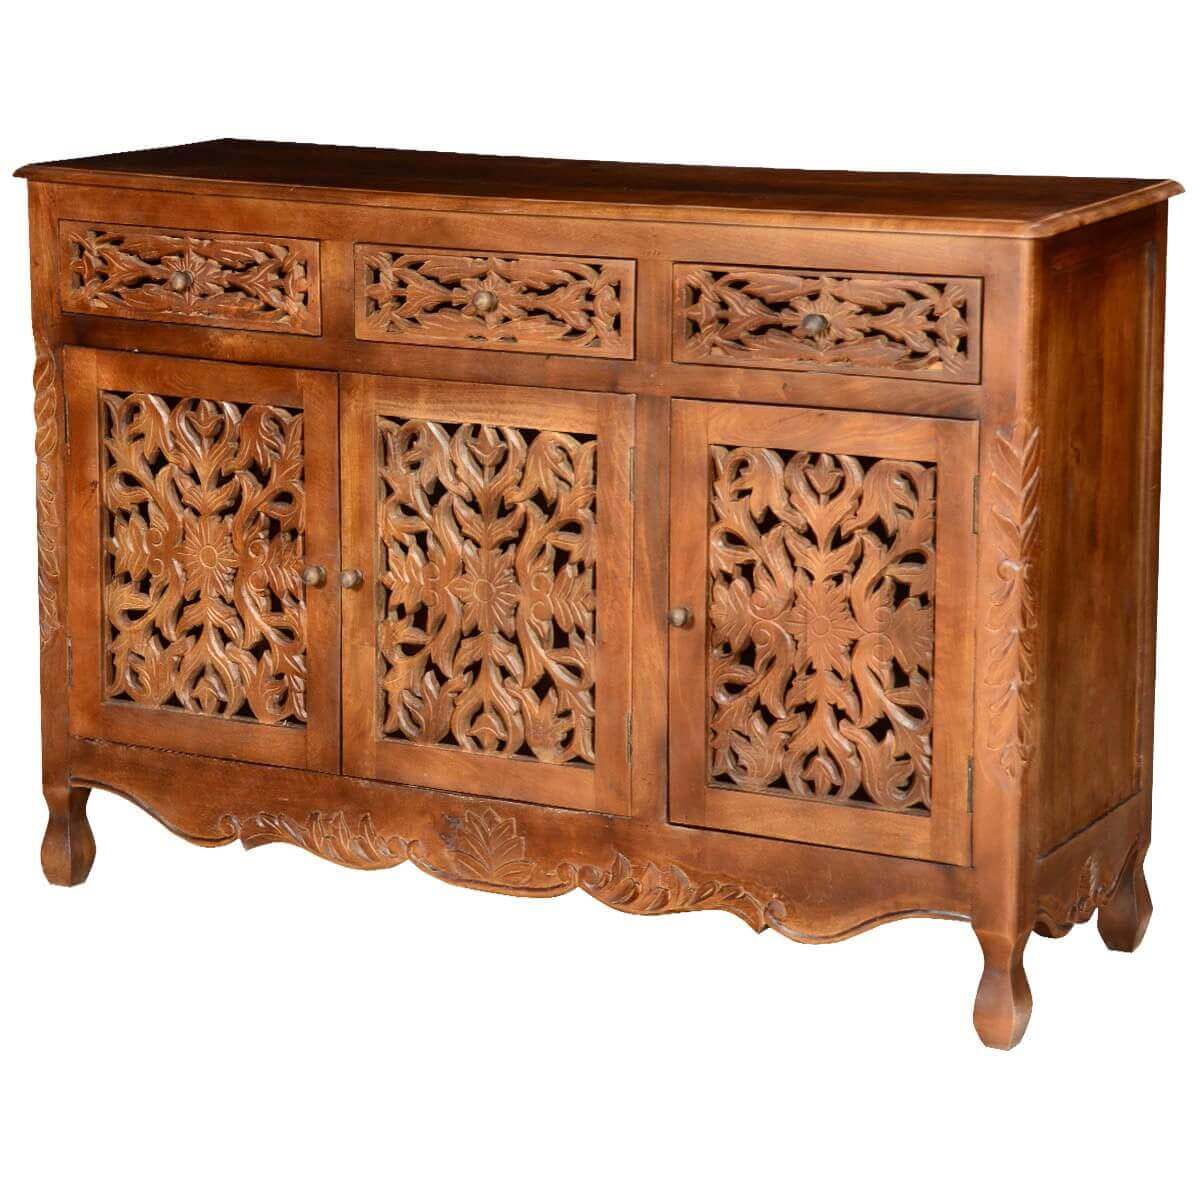 Handmade Hand Carved Buffet Table in Natural Color | Wooden Three Doors and Drawers Sideboard Buffet & Sideboard - Bone Inlay Furnitures